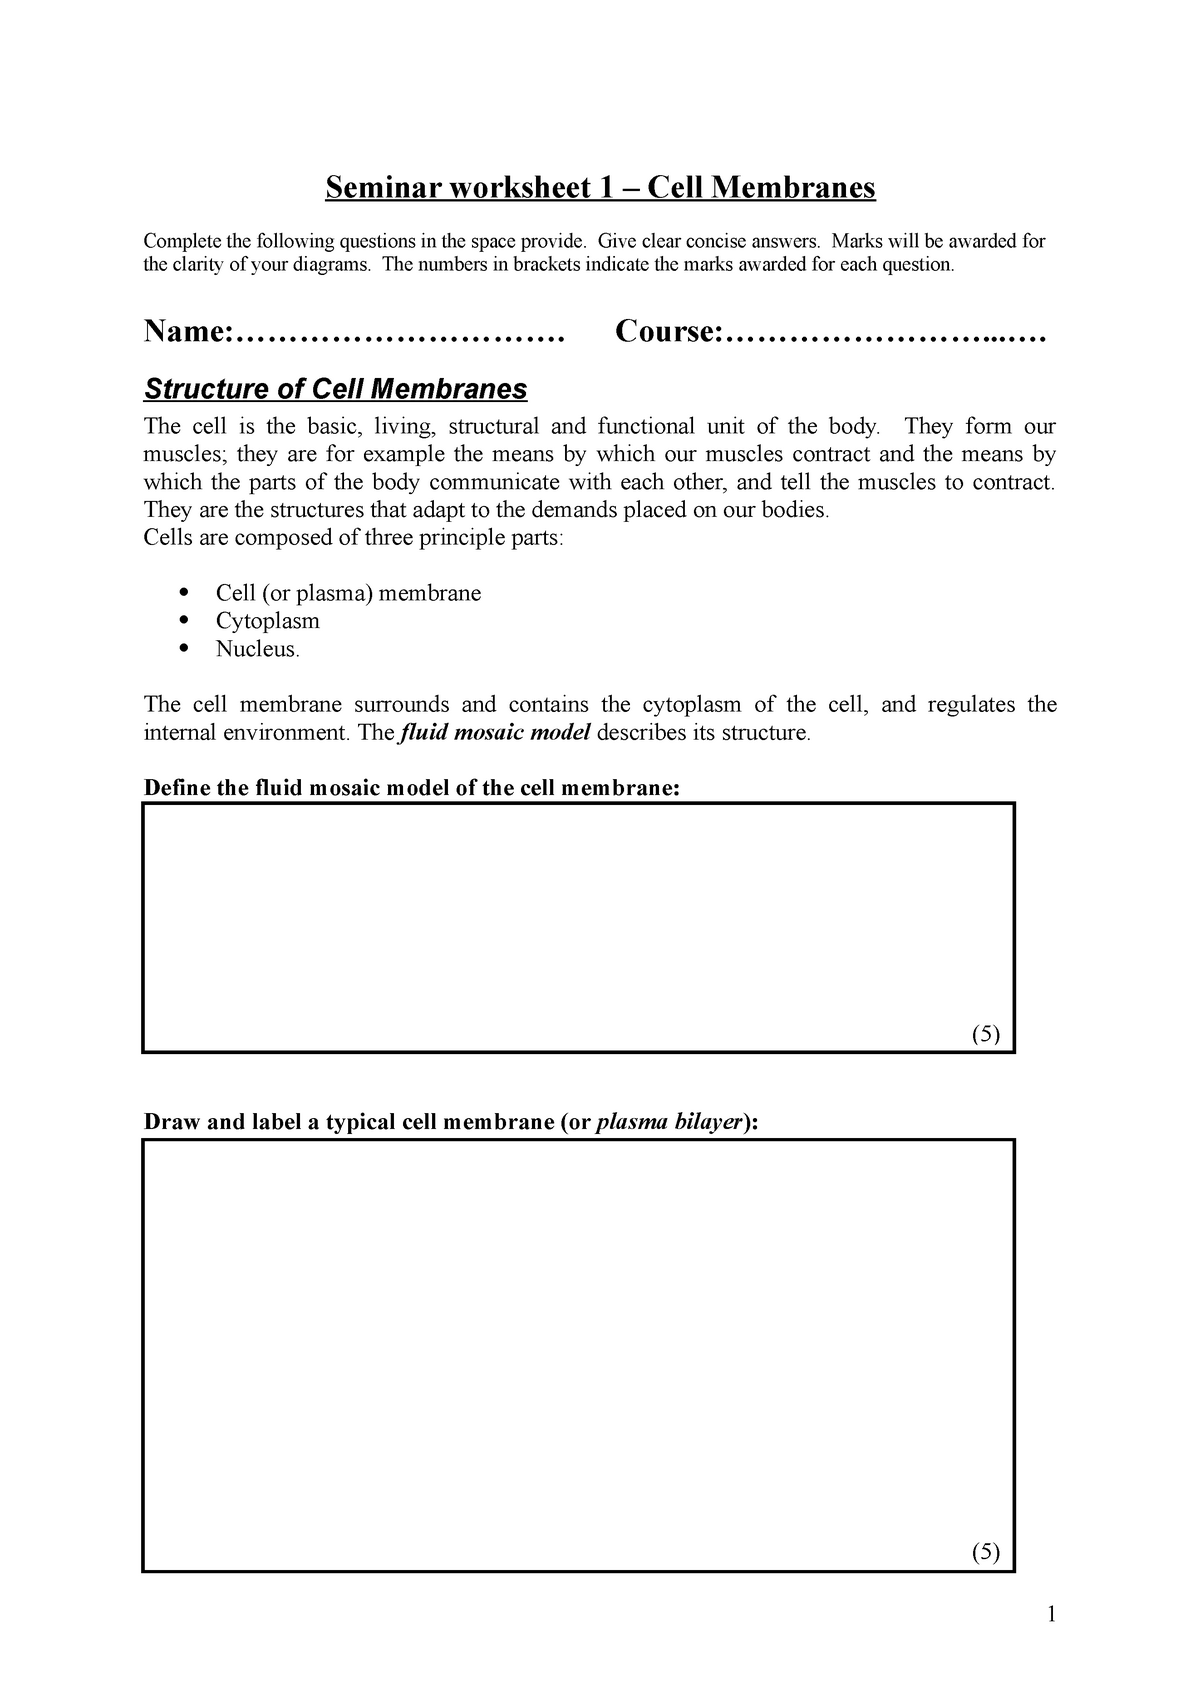 Seminar worksheet 25 Cell membranes - Applied Human Physiology Within Cell Membrane Images Worksheet Answers